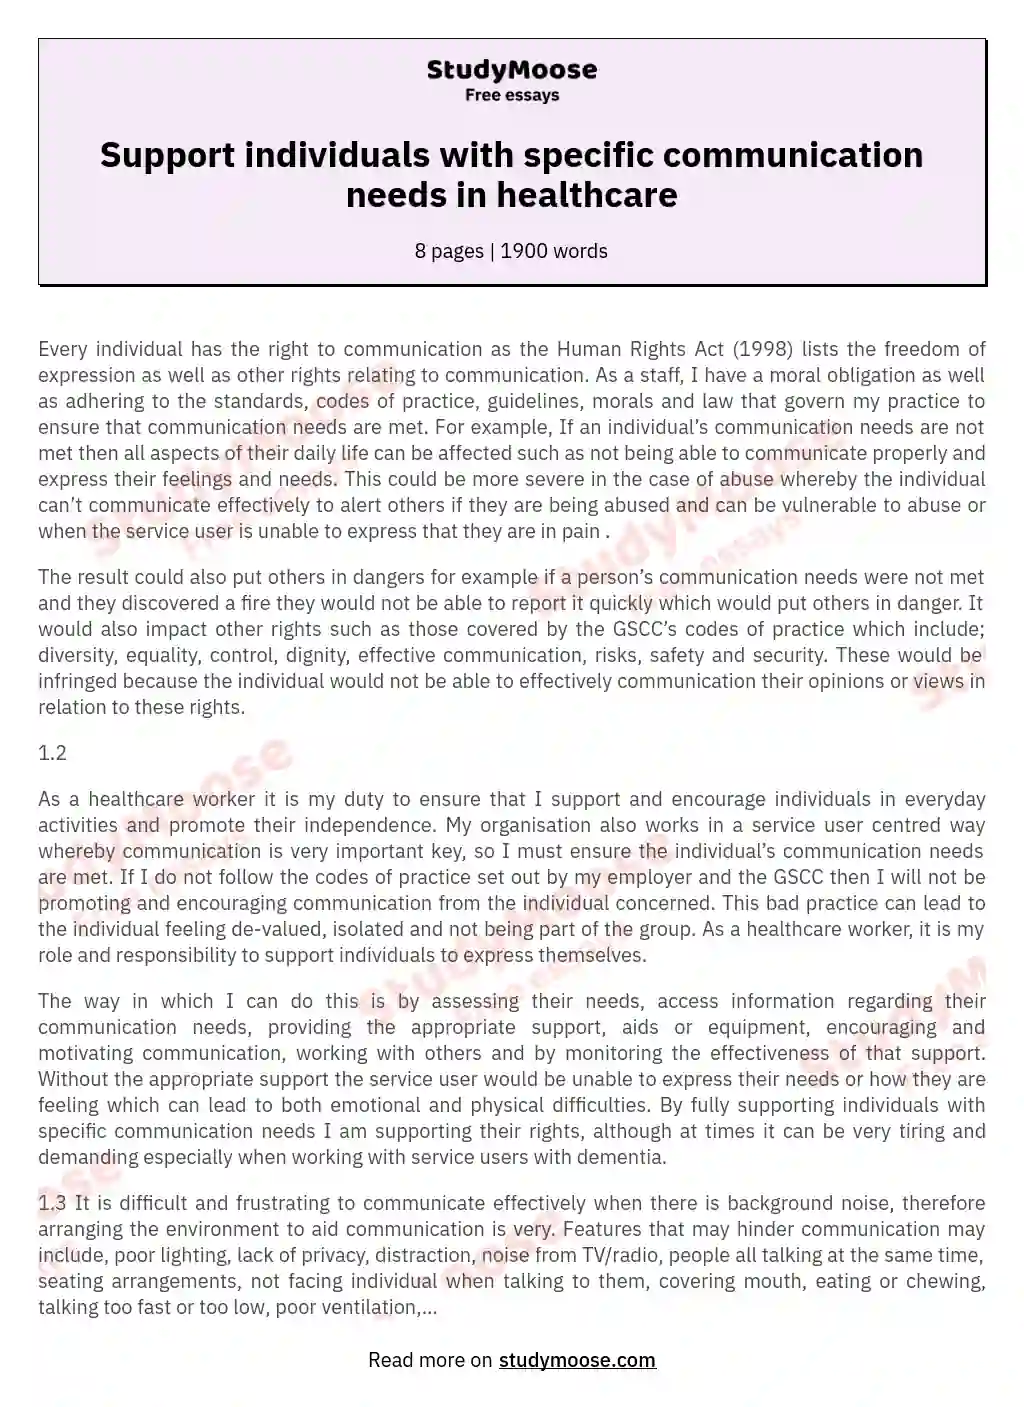 Support individuals with specific communication needs in healthcare essay